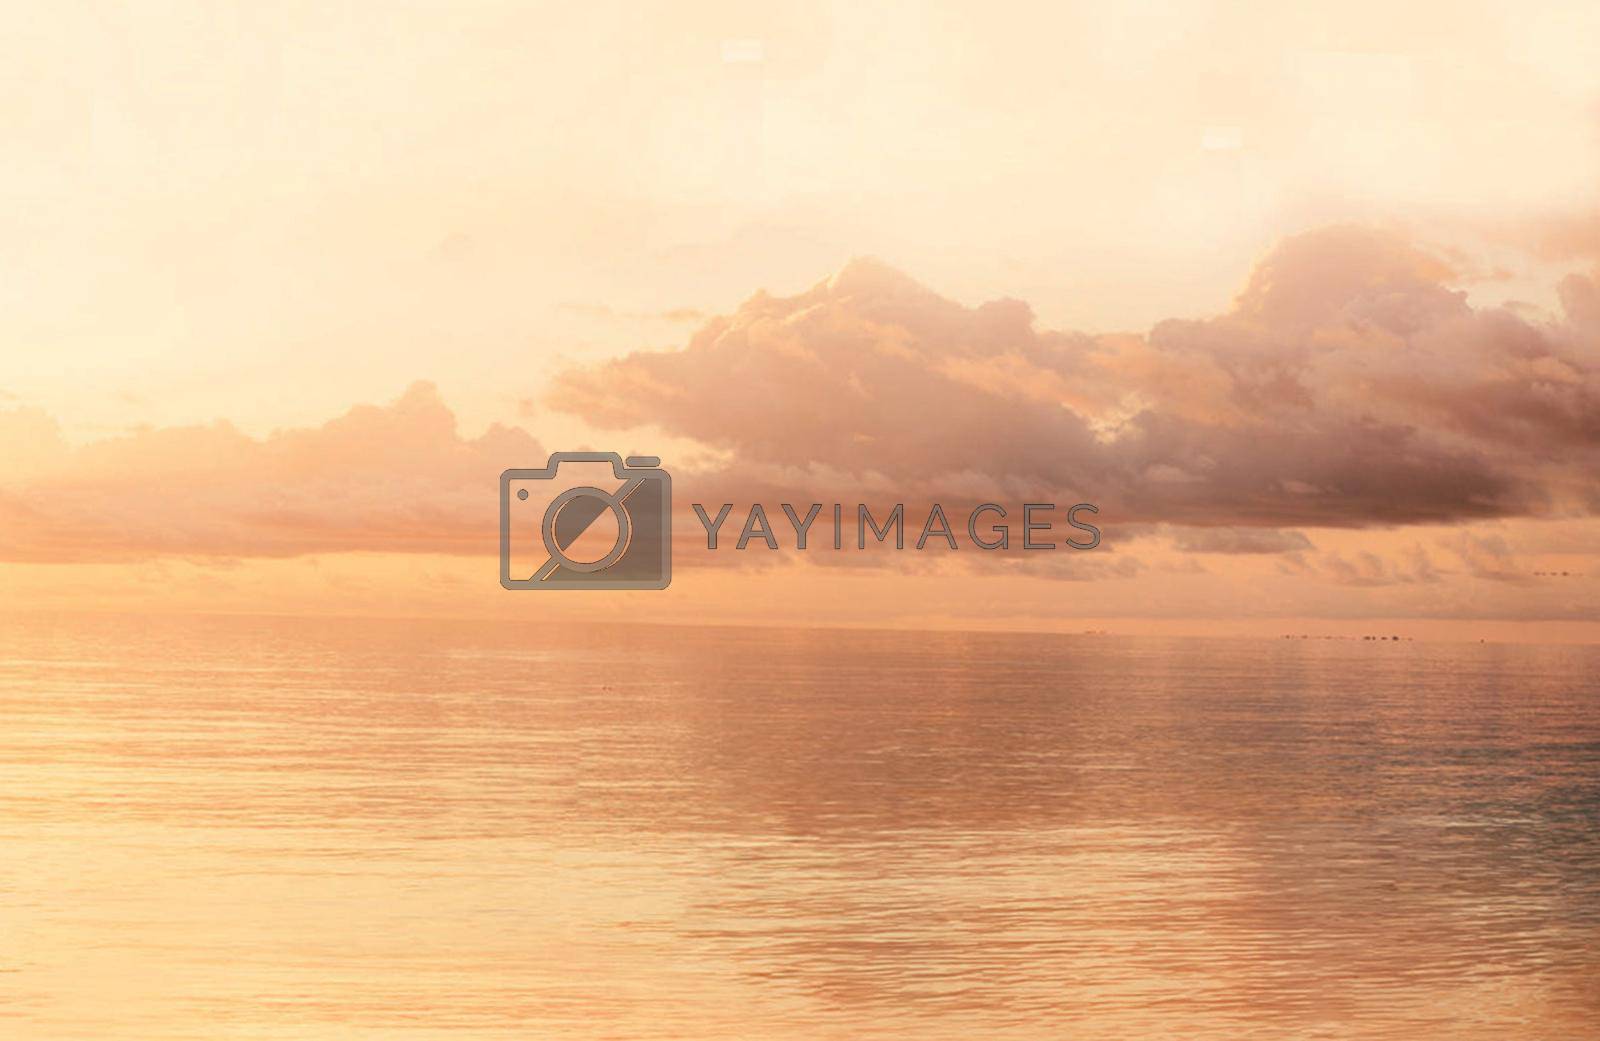 Royalty free image of Maldives pictures by TravelSync27